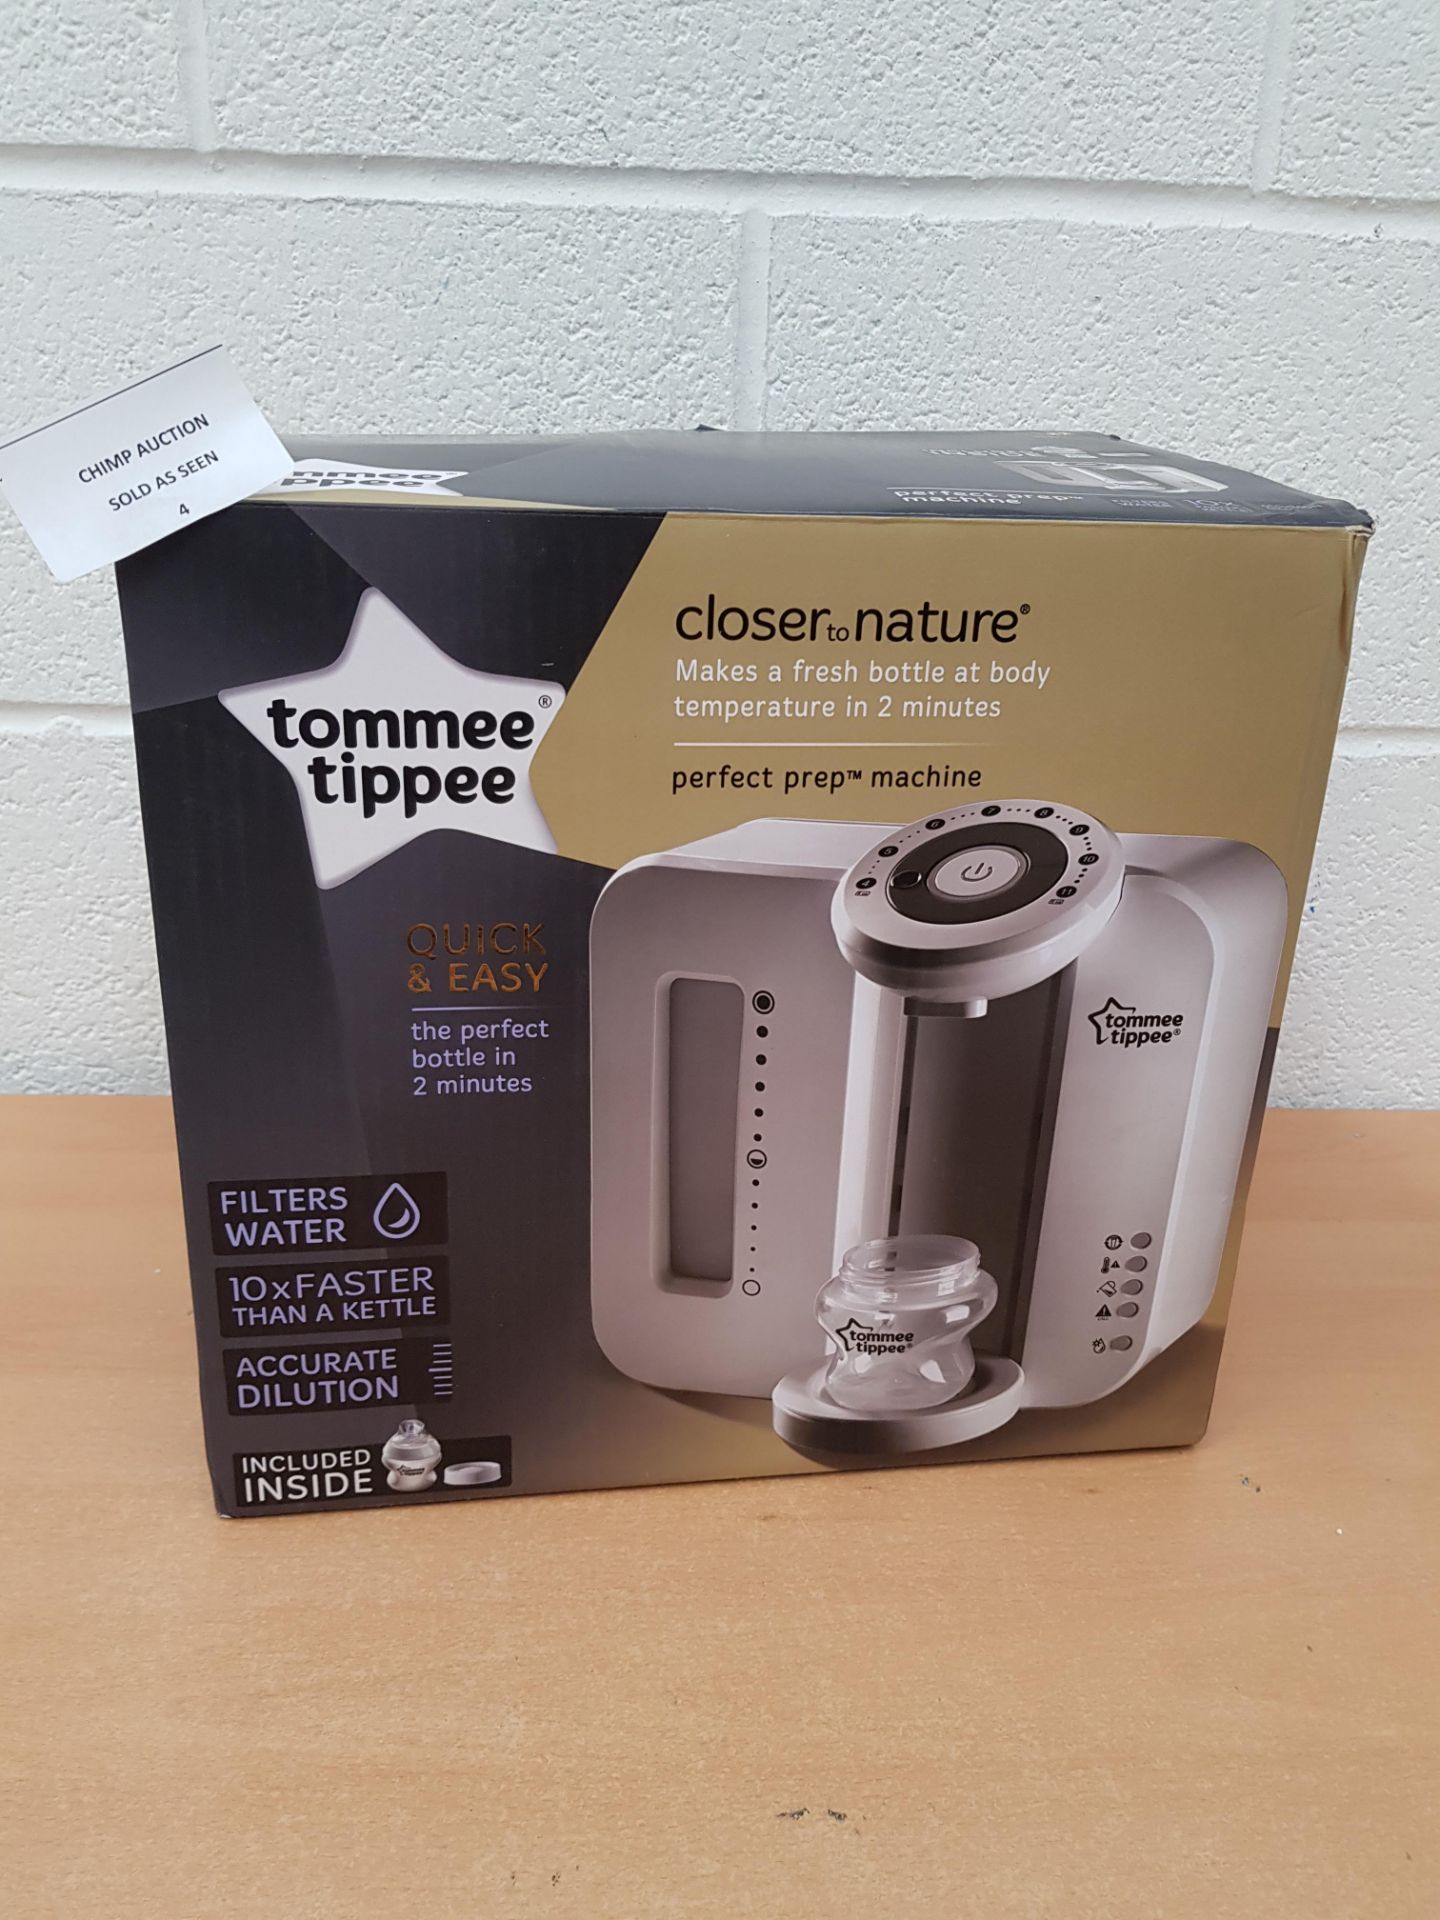 Tommee Tippee Perfect Prep Machine RRP £129.99.